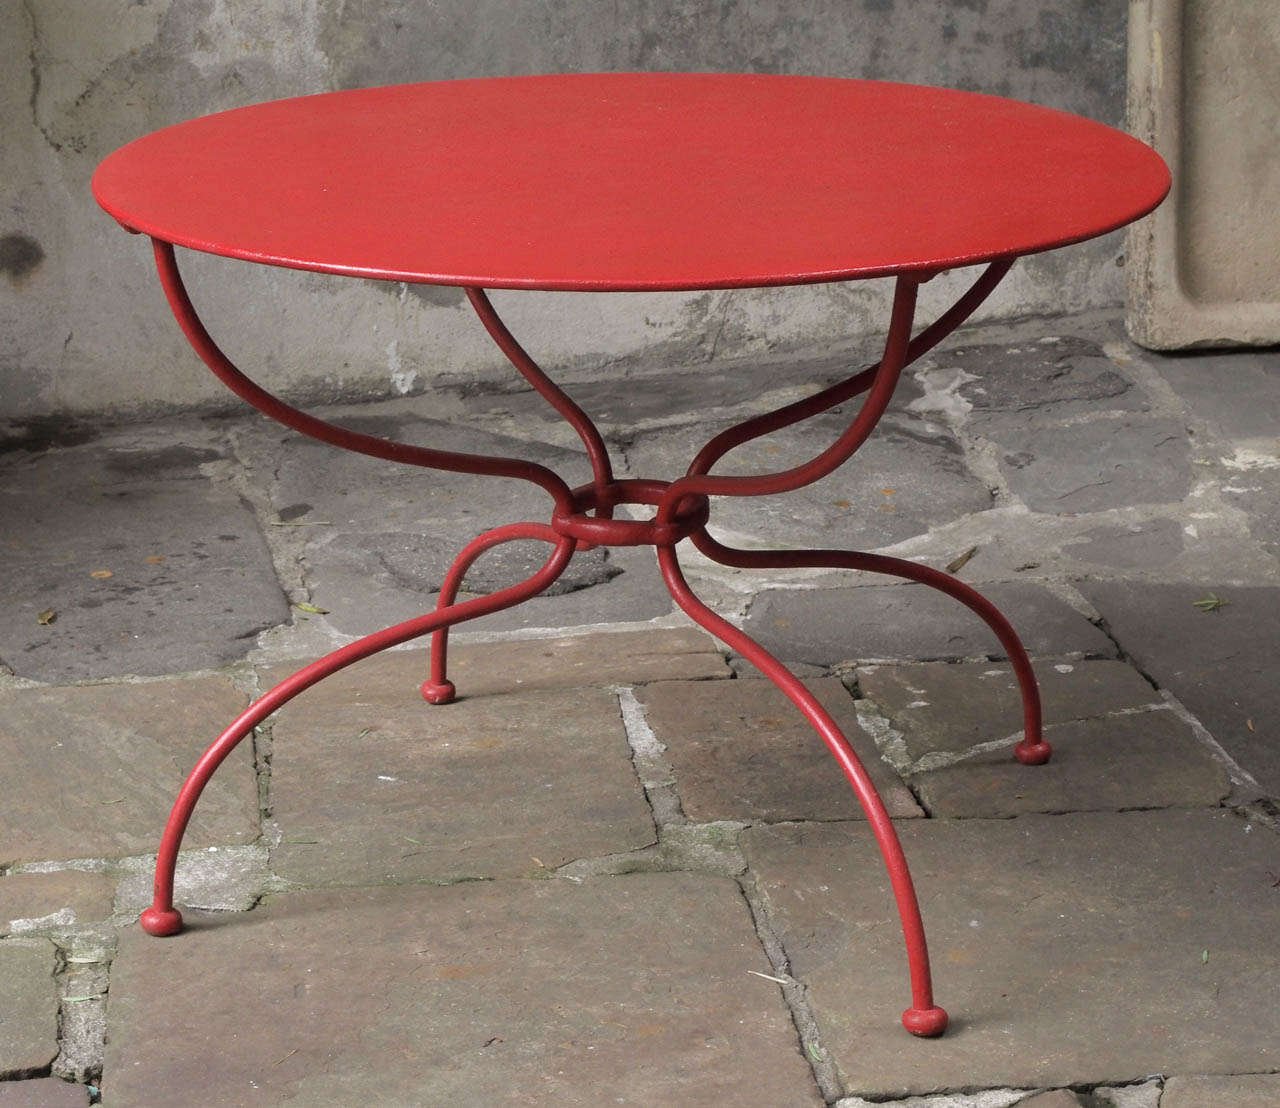 19th century French painted iron round garden table with 